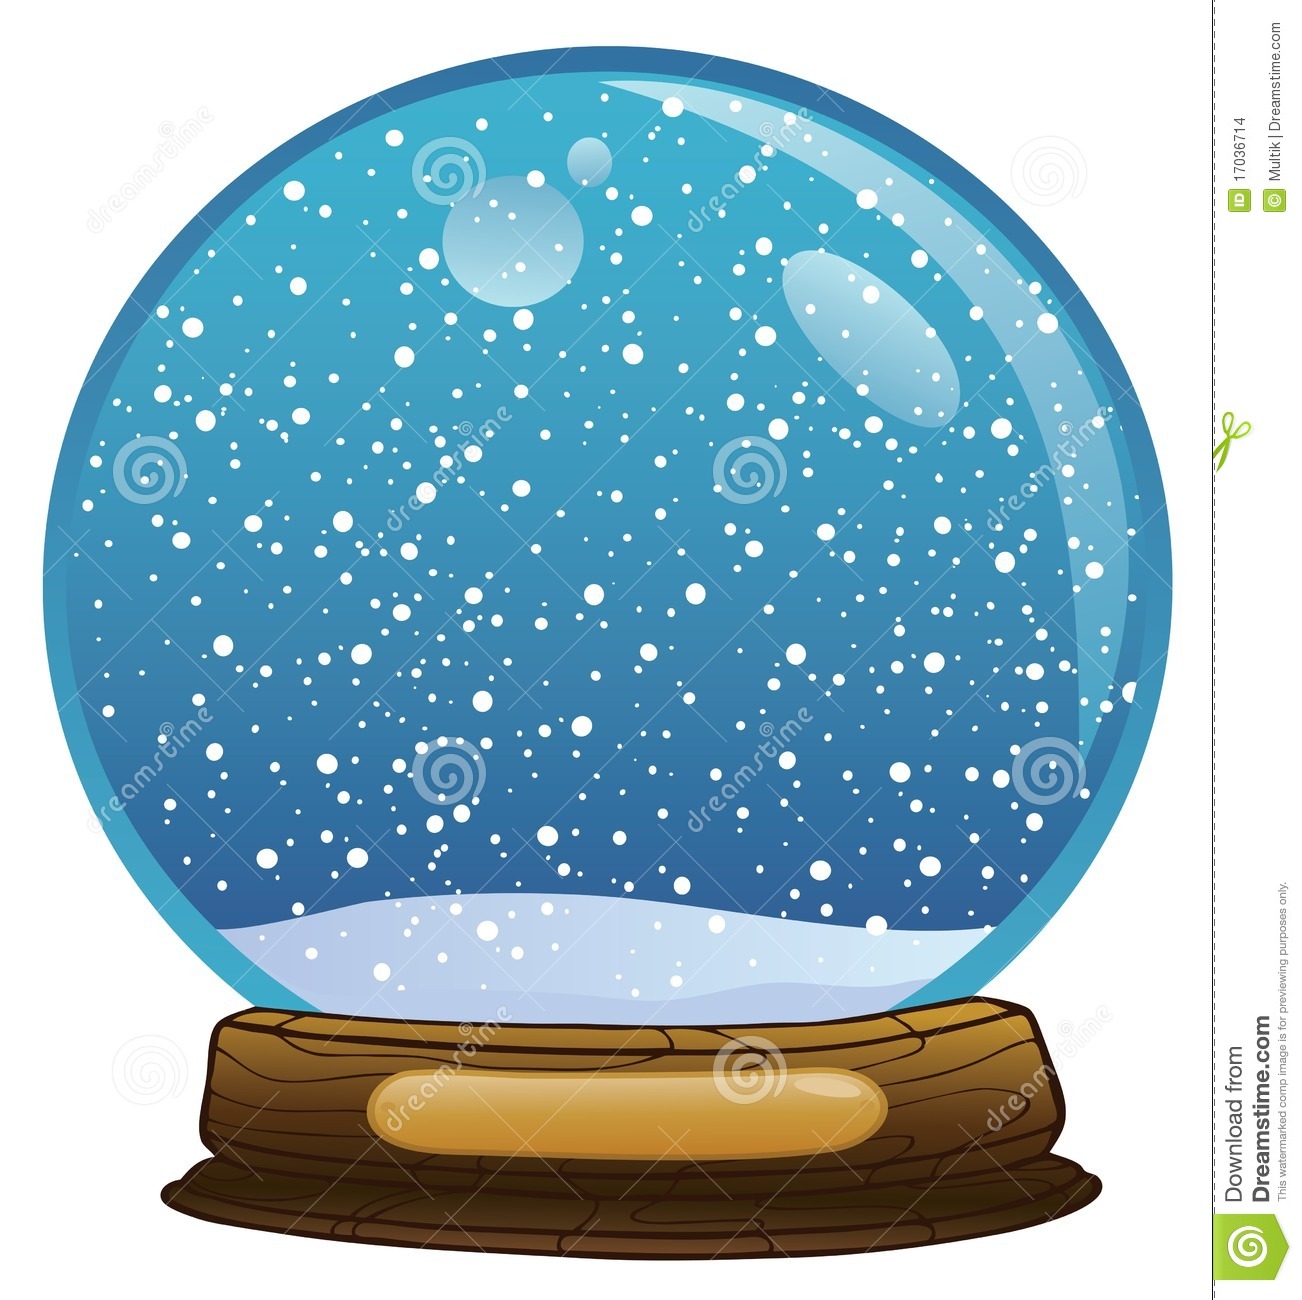 Animated Snow Globes. ️Clip